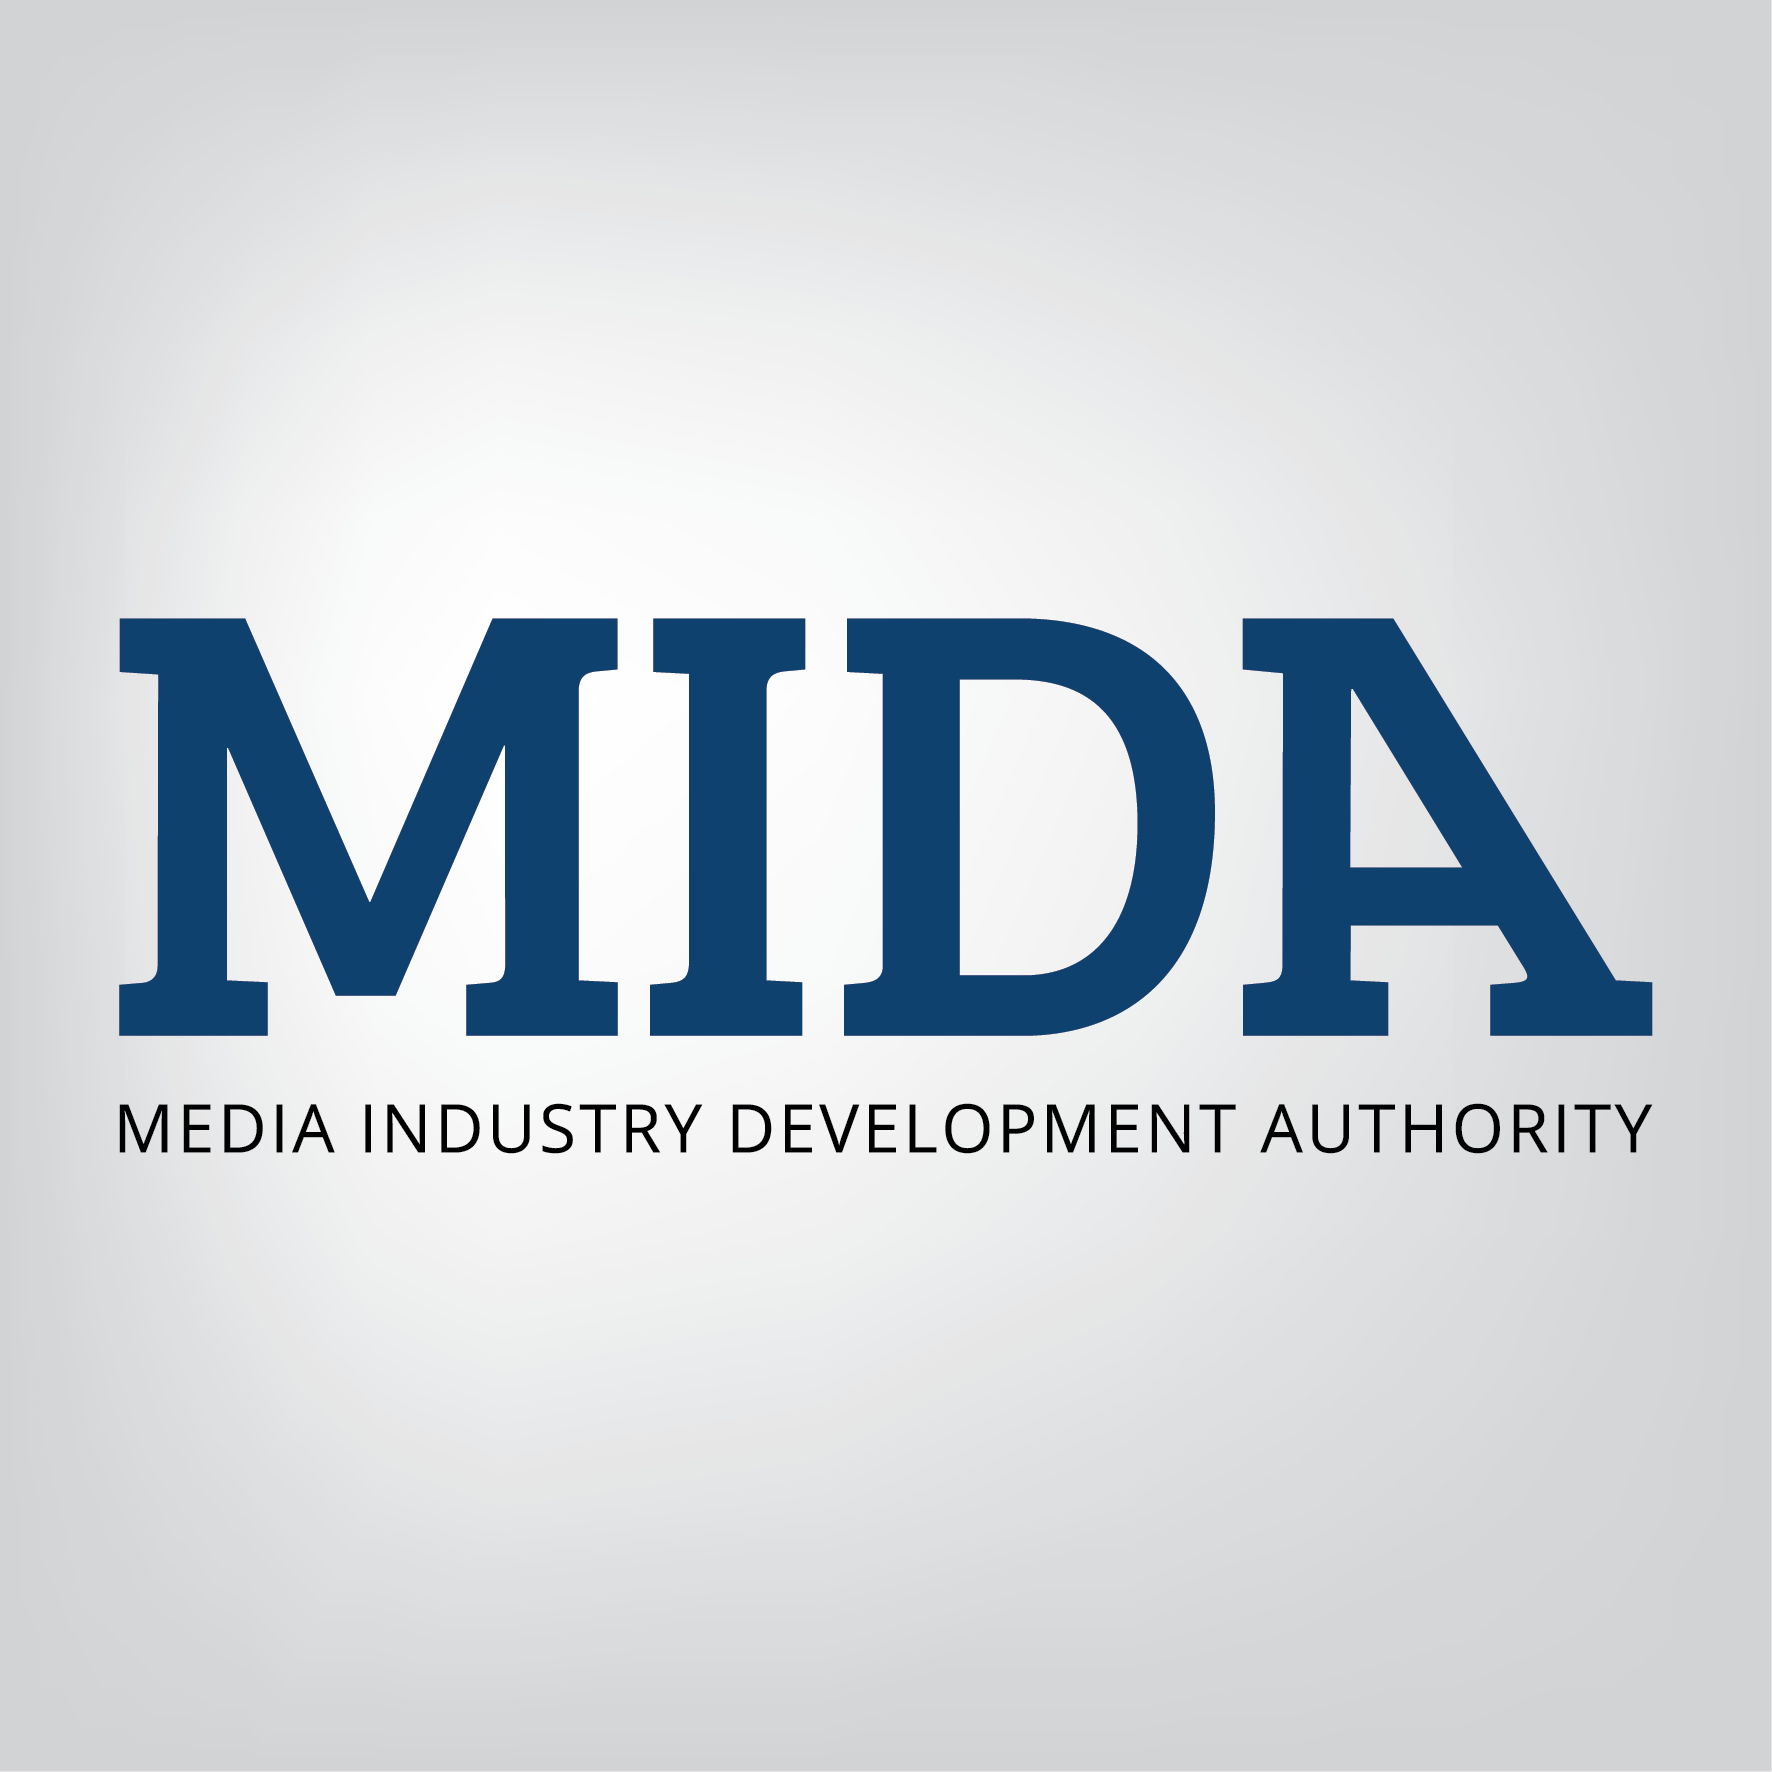 Official Twitter of the Media Industry Development Authority in Fiji.